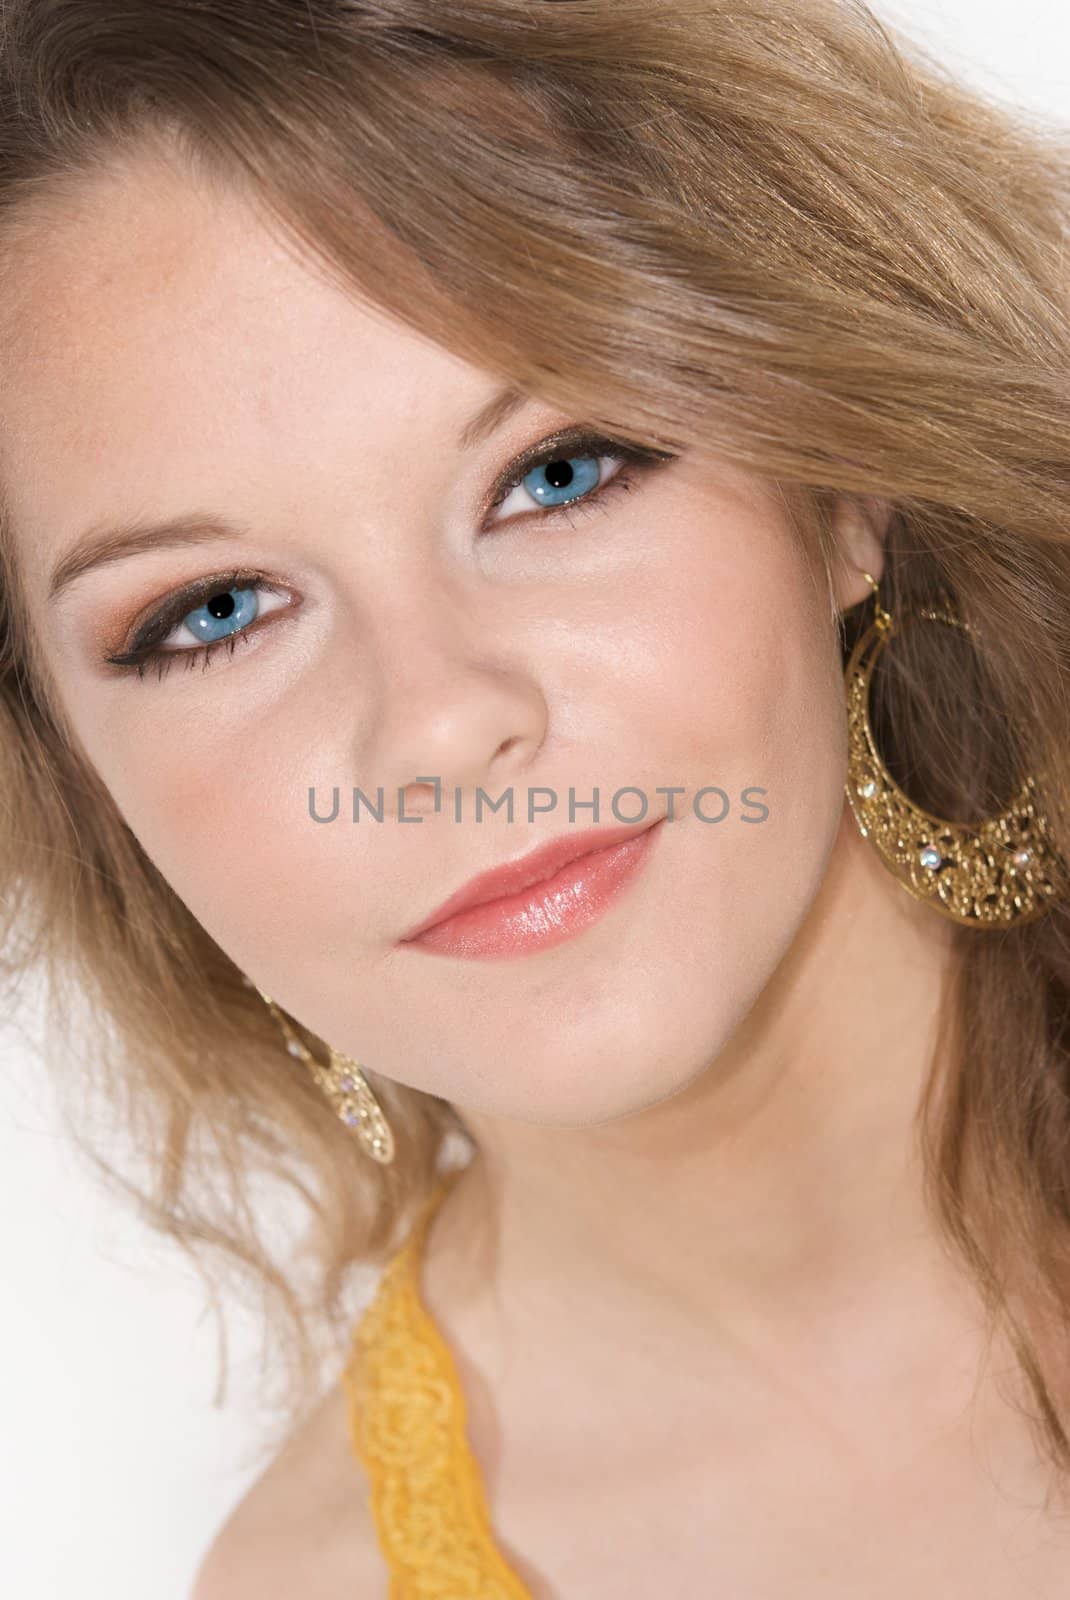 Headshot of Beautiful Teenager with Makeup by pixelsnap